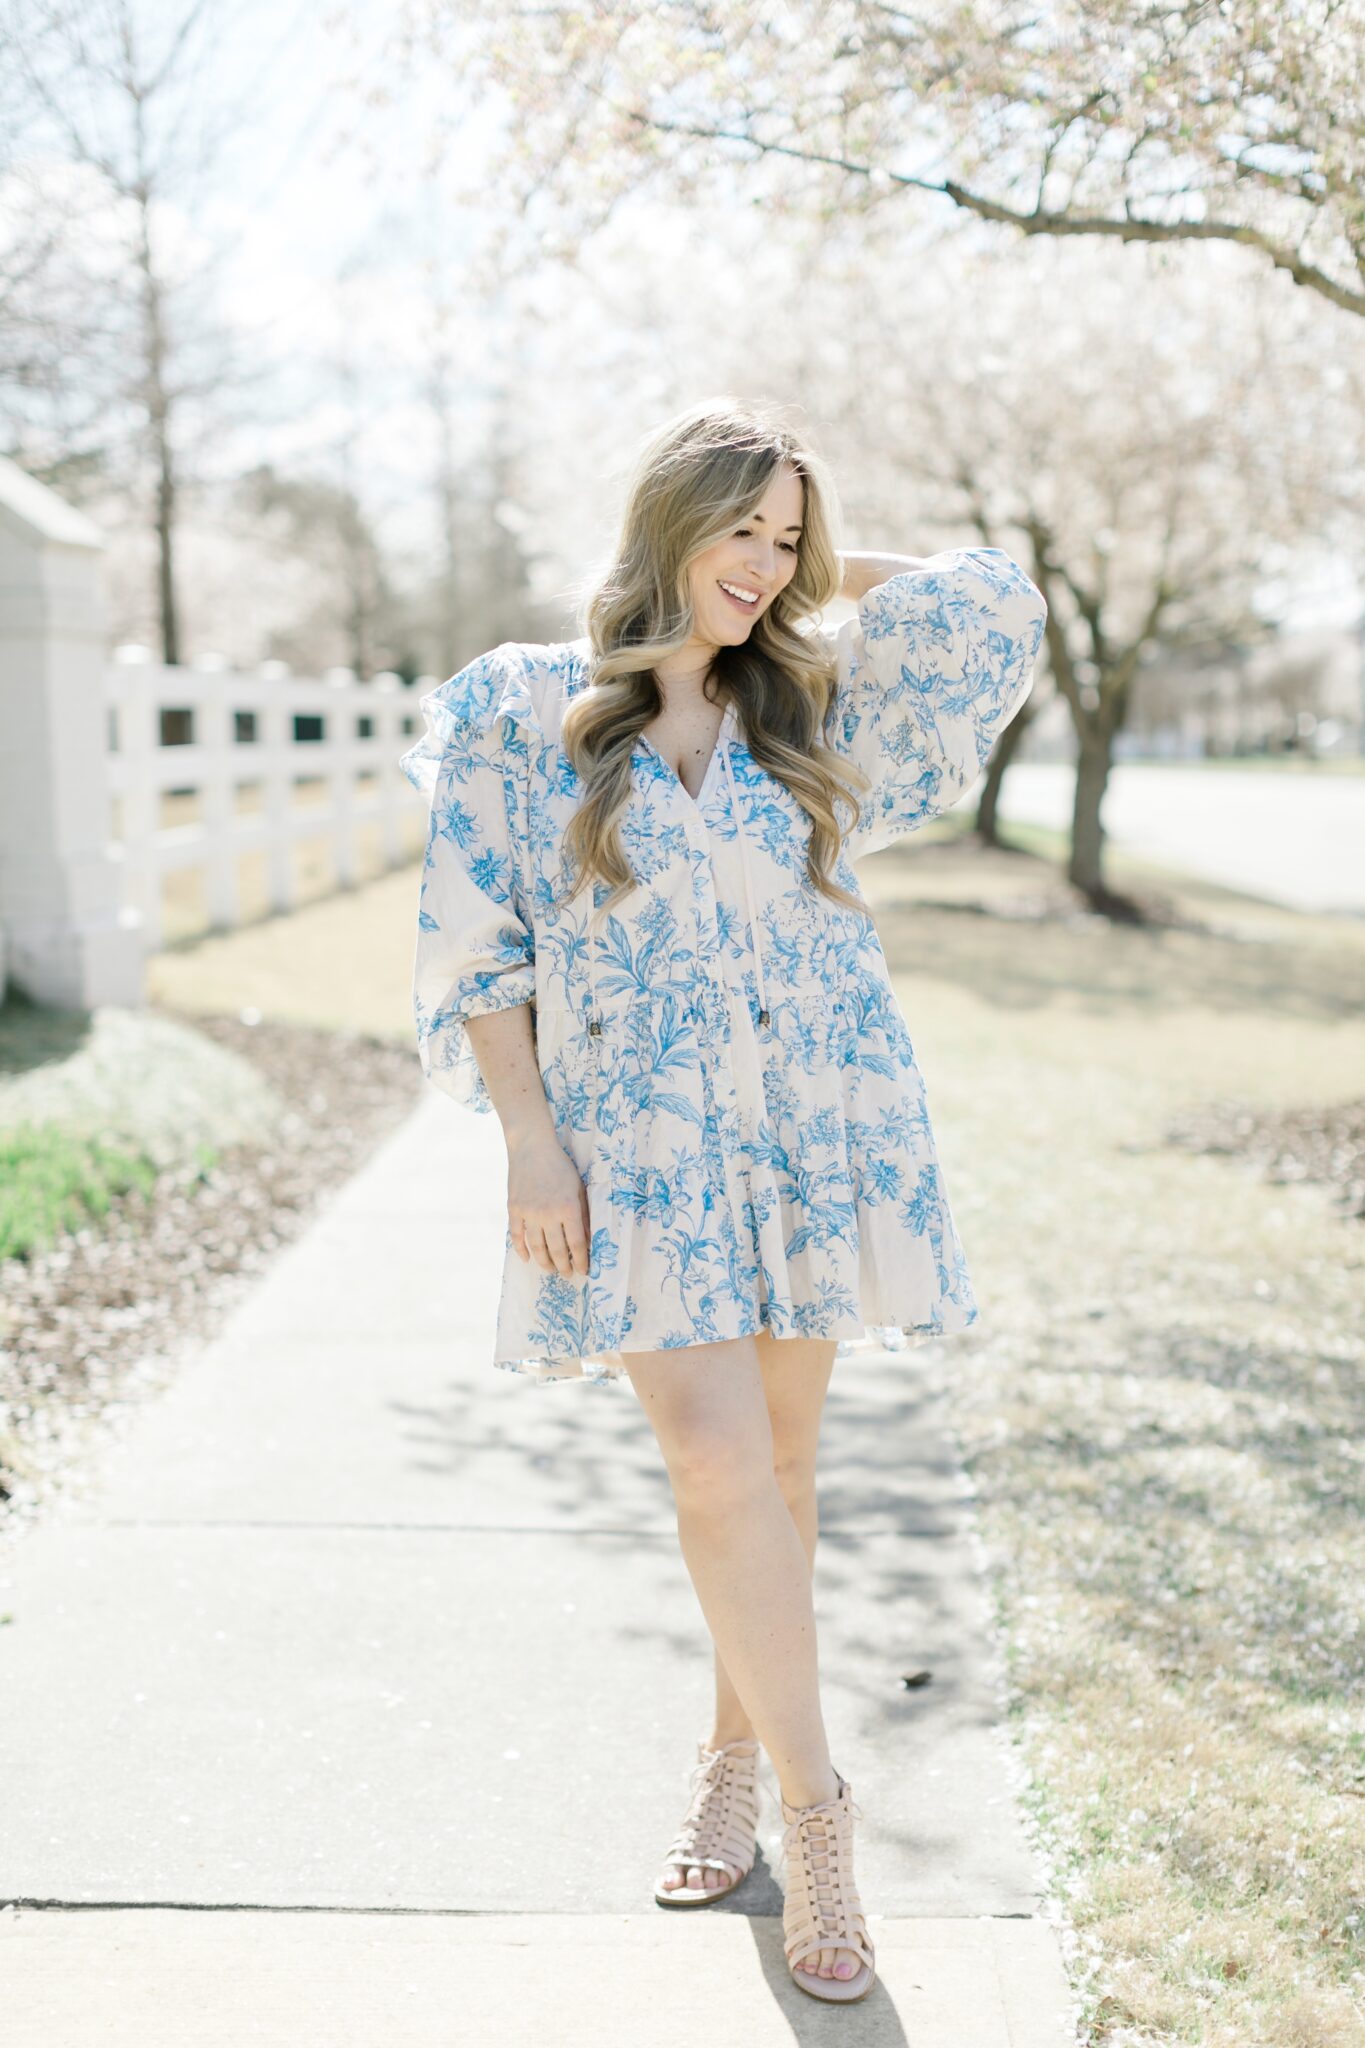 Feminine spring look styled by top Memphis fashion blogger, Walking in Memphis in High Heels.